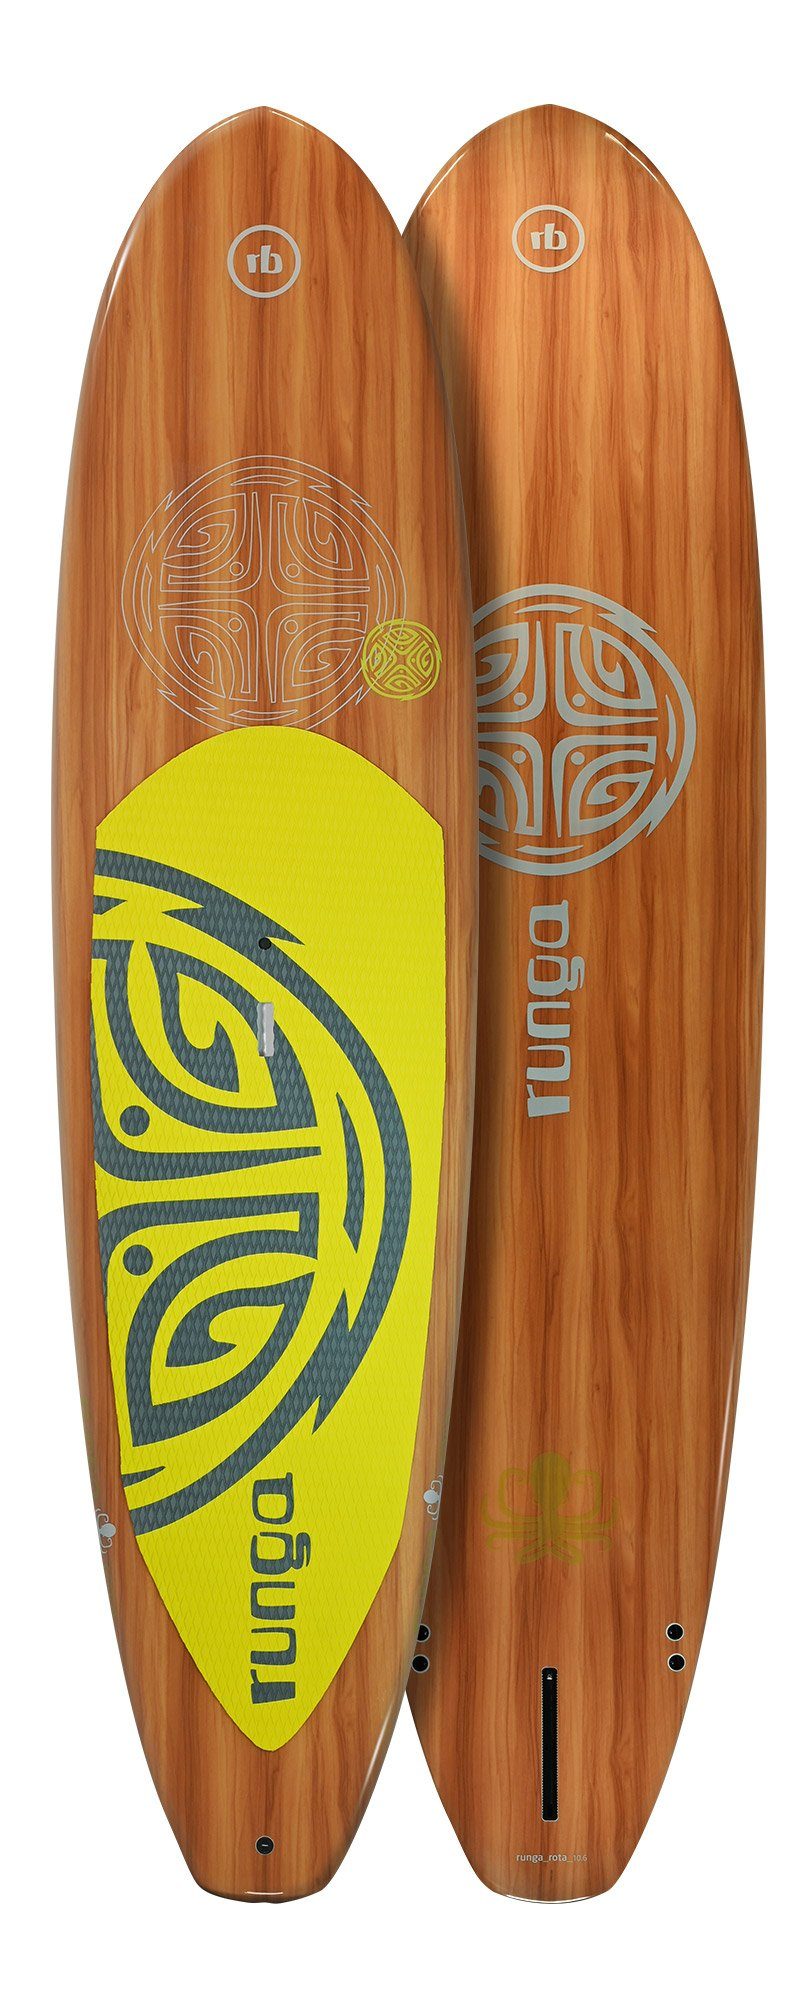 Runga-Boards SUP-Board ROTA YELLOW Hard Board Stand Up Paddling SUP, Allrounder, (Set 10.6, Inkl. coiled leash & 3-tlg. Finnen-Set)